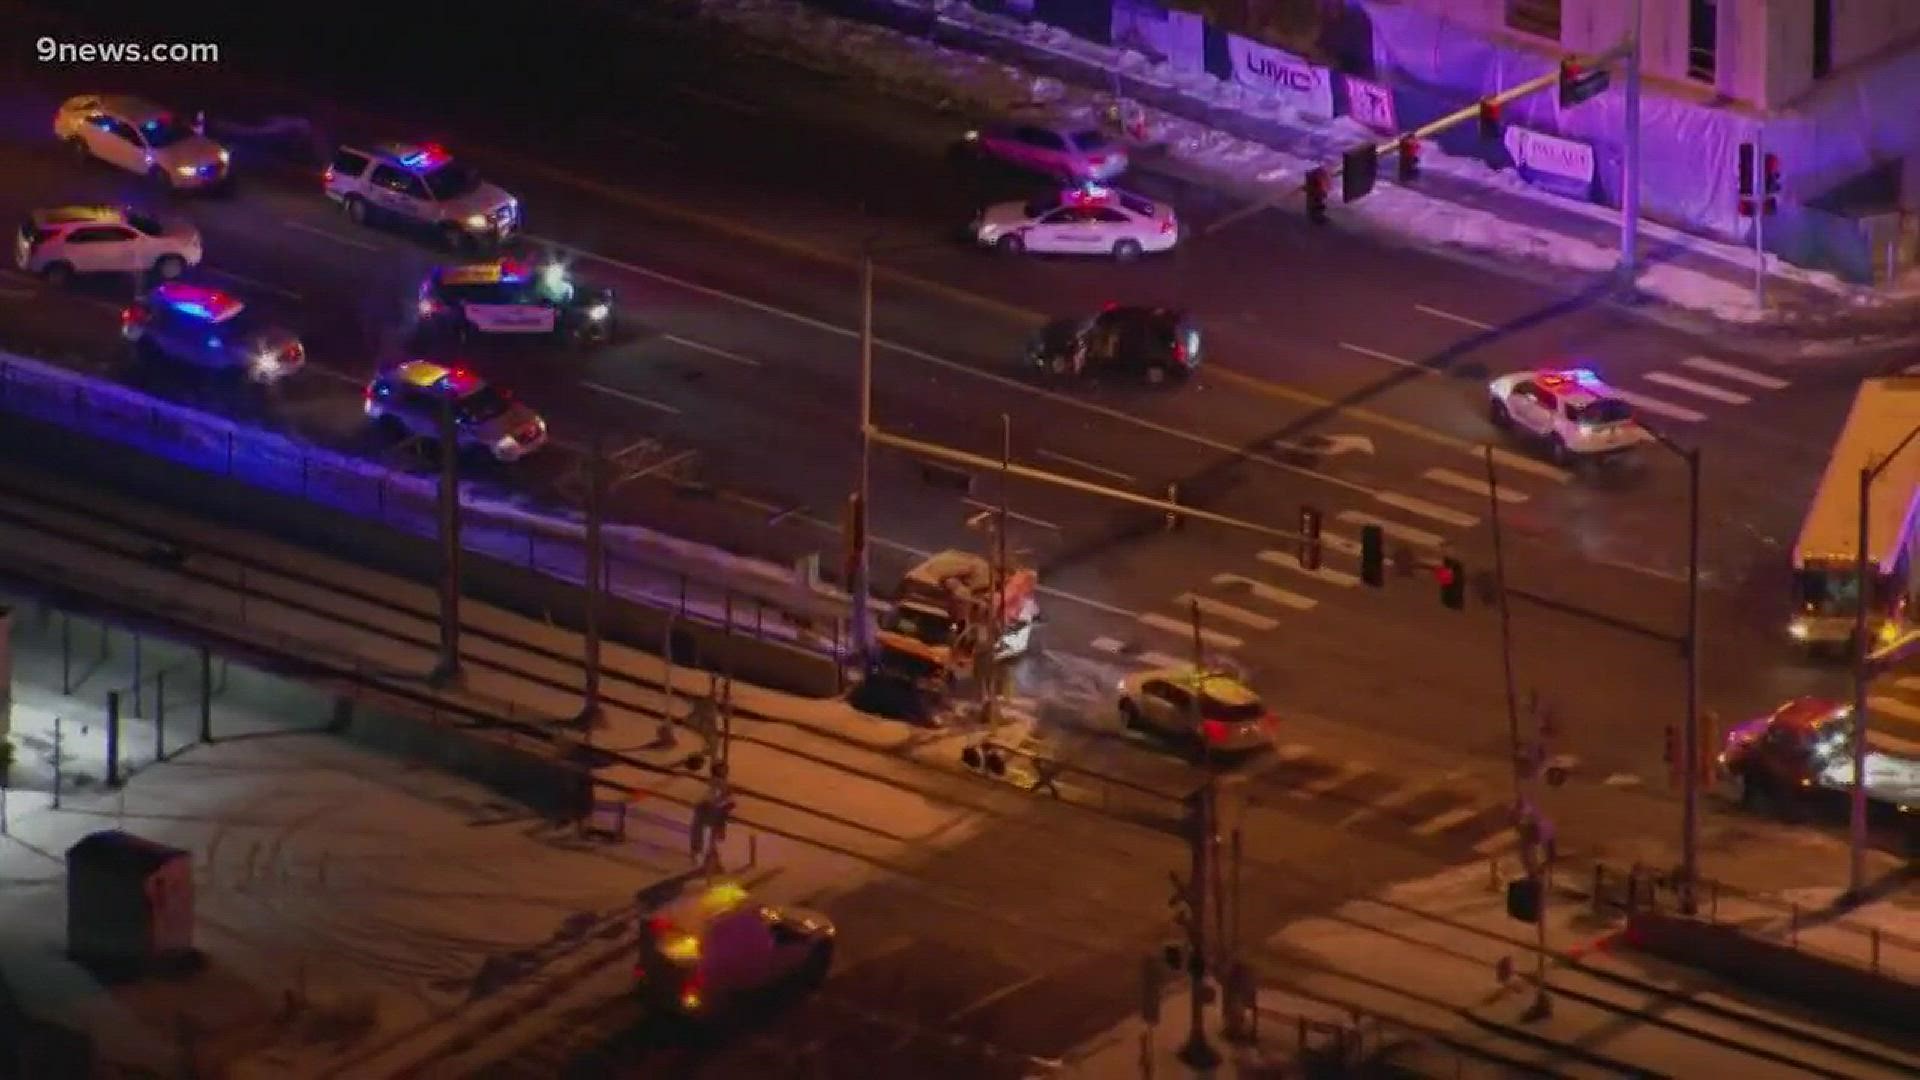 The ambulance smashed into an RTD crossing arm making them inoperable. No word on injuries at this time.